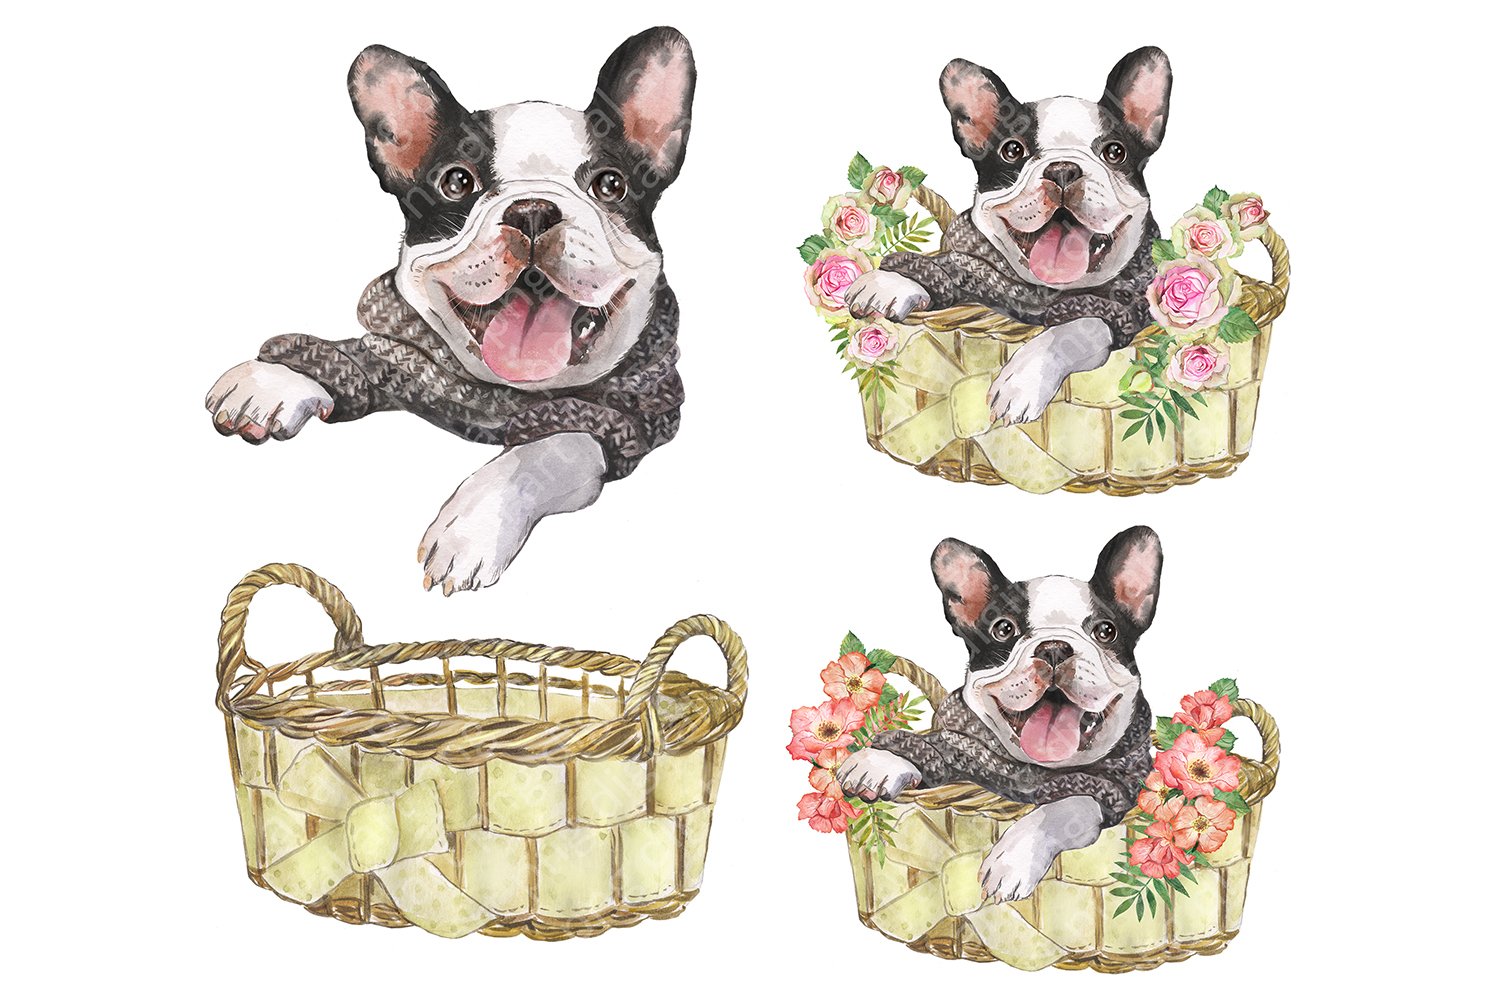 Watercolor drawing of a dog in a basket.